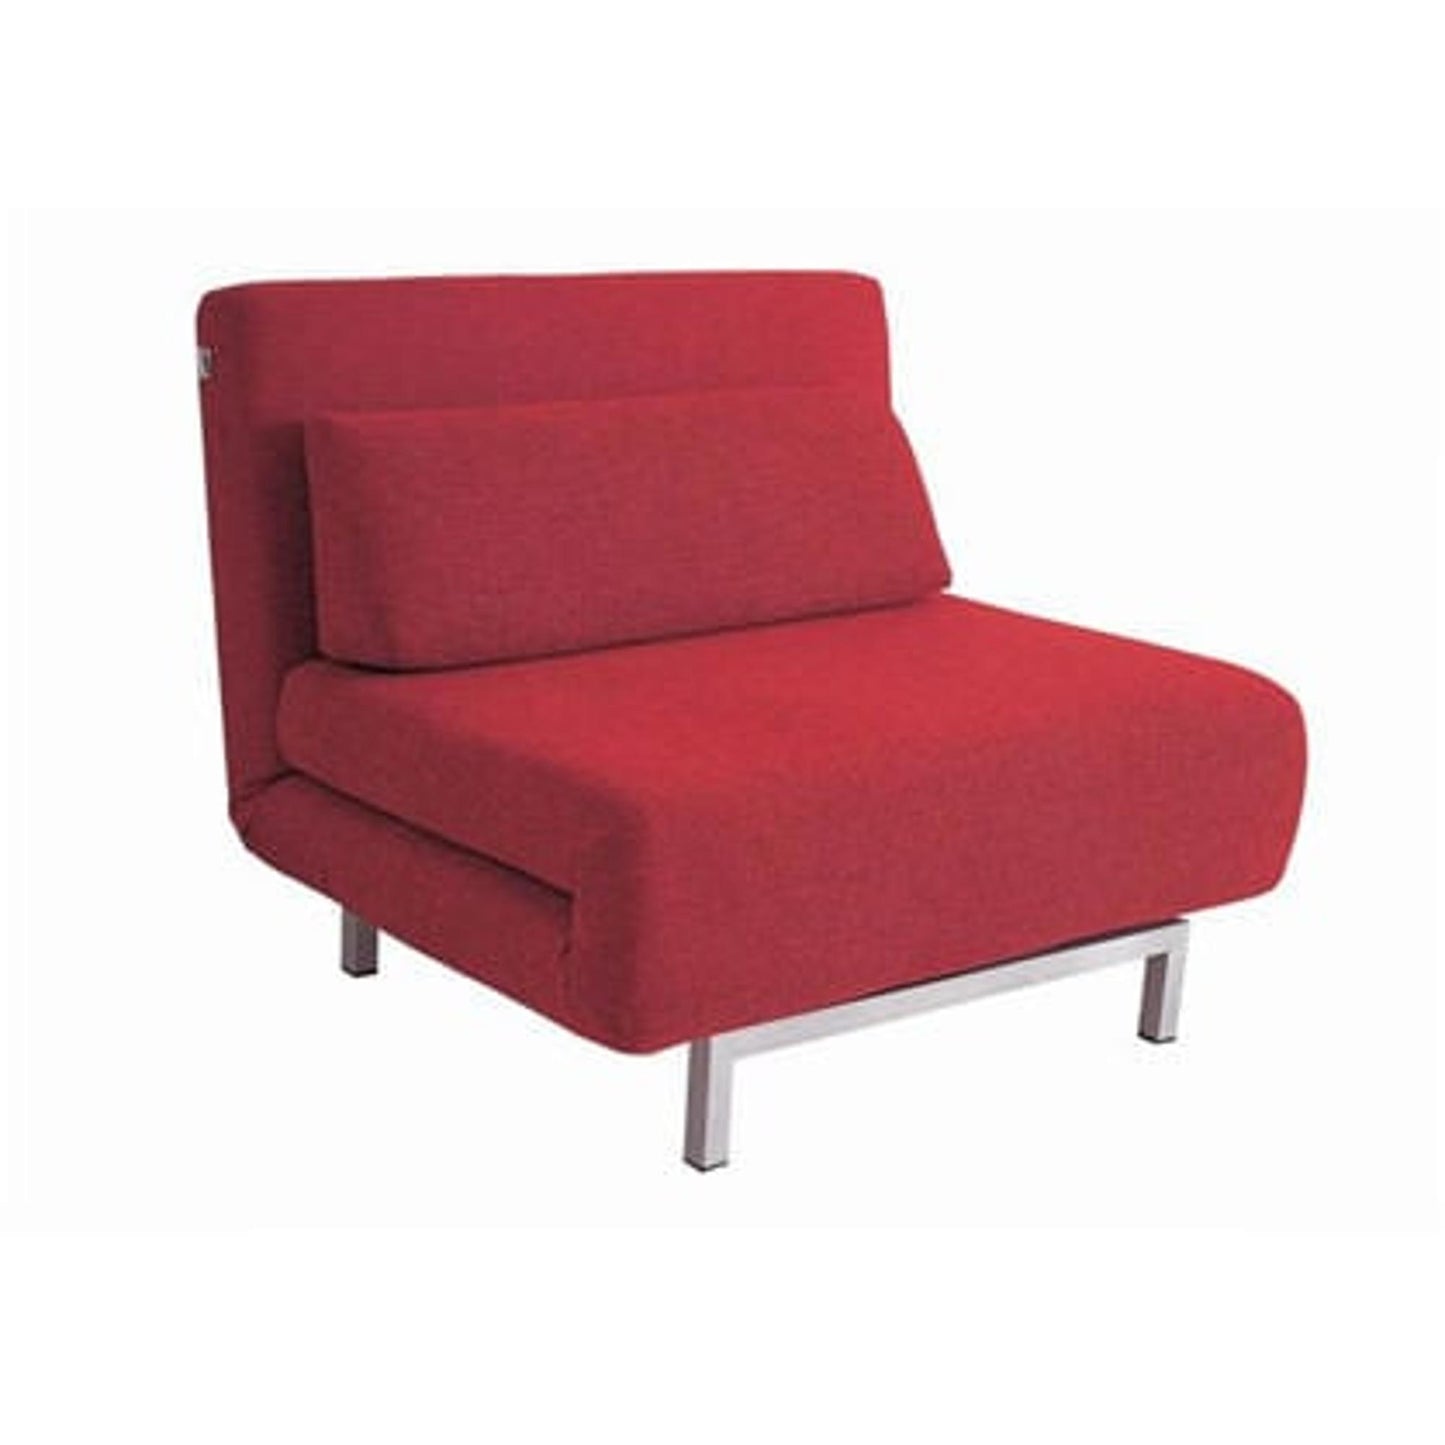 Chair Bed in Red